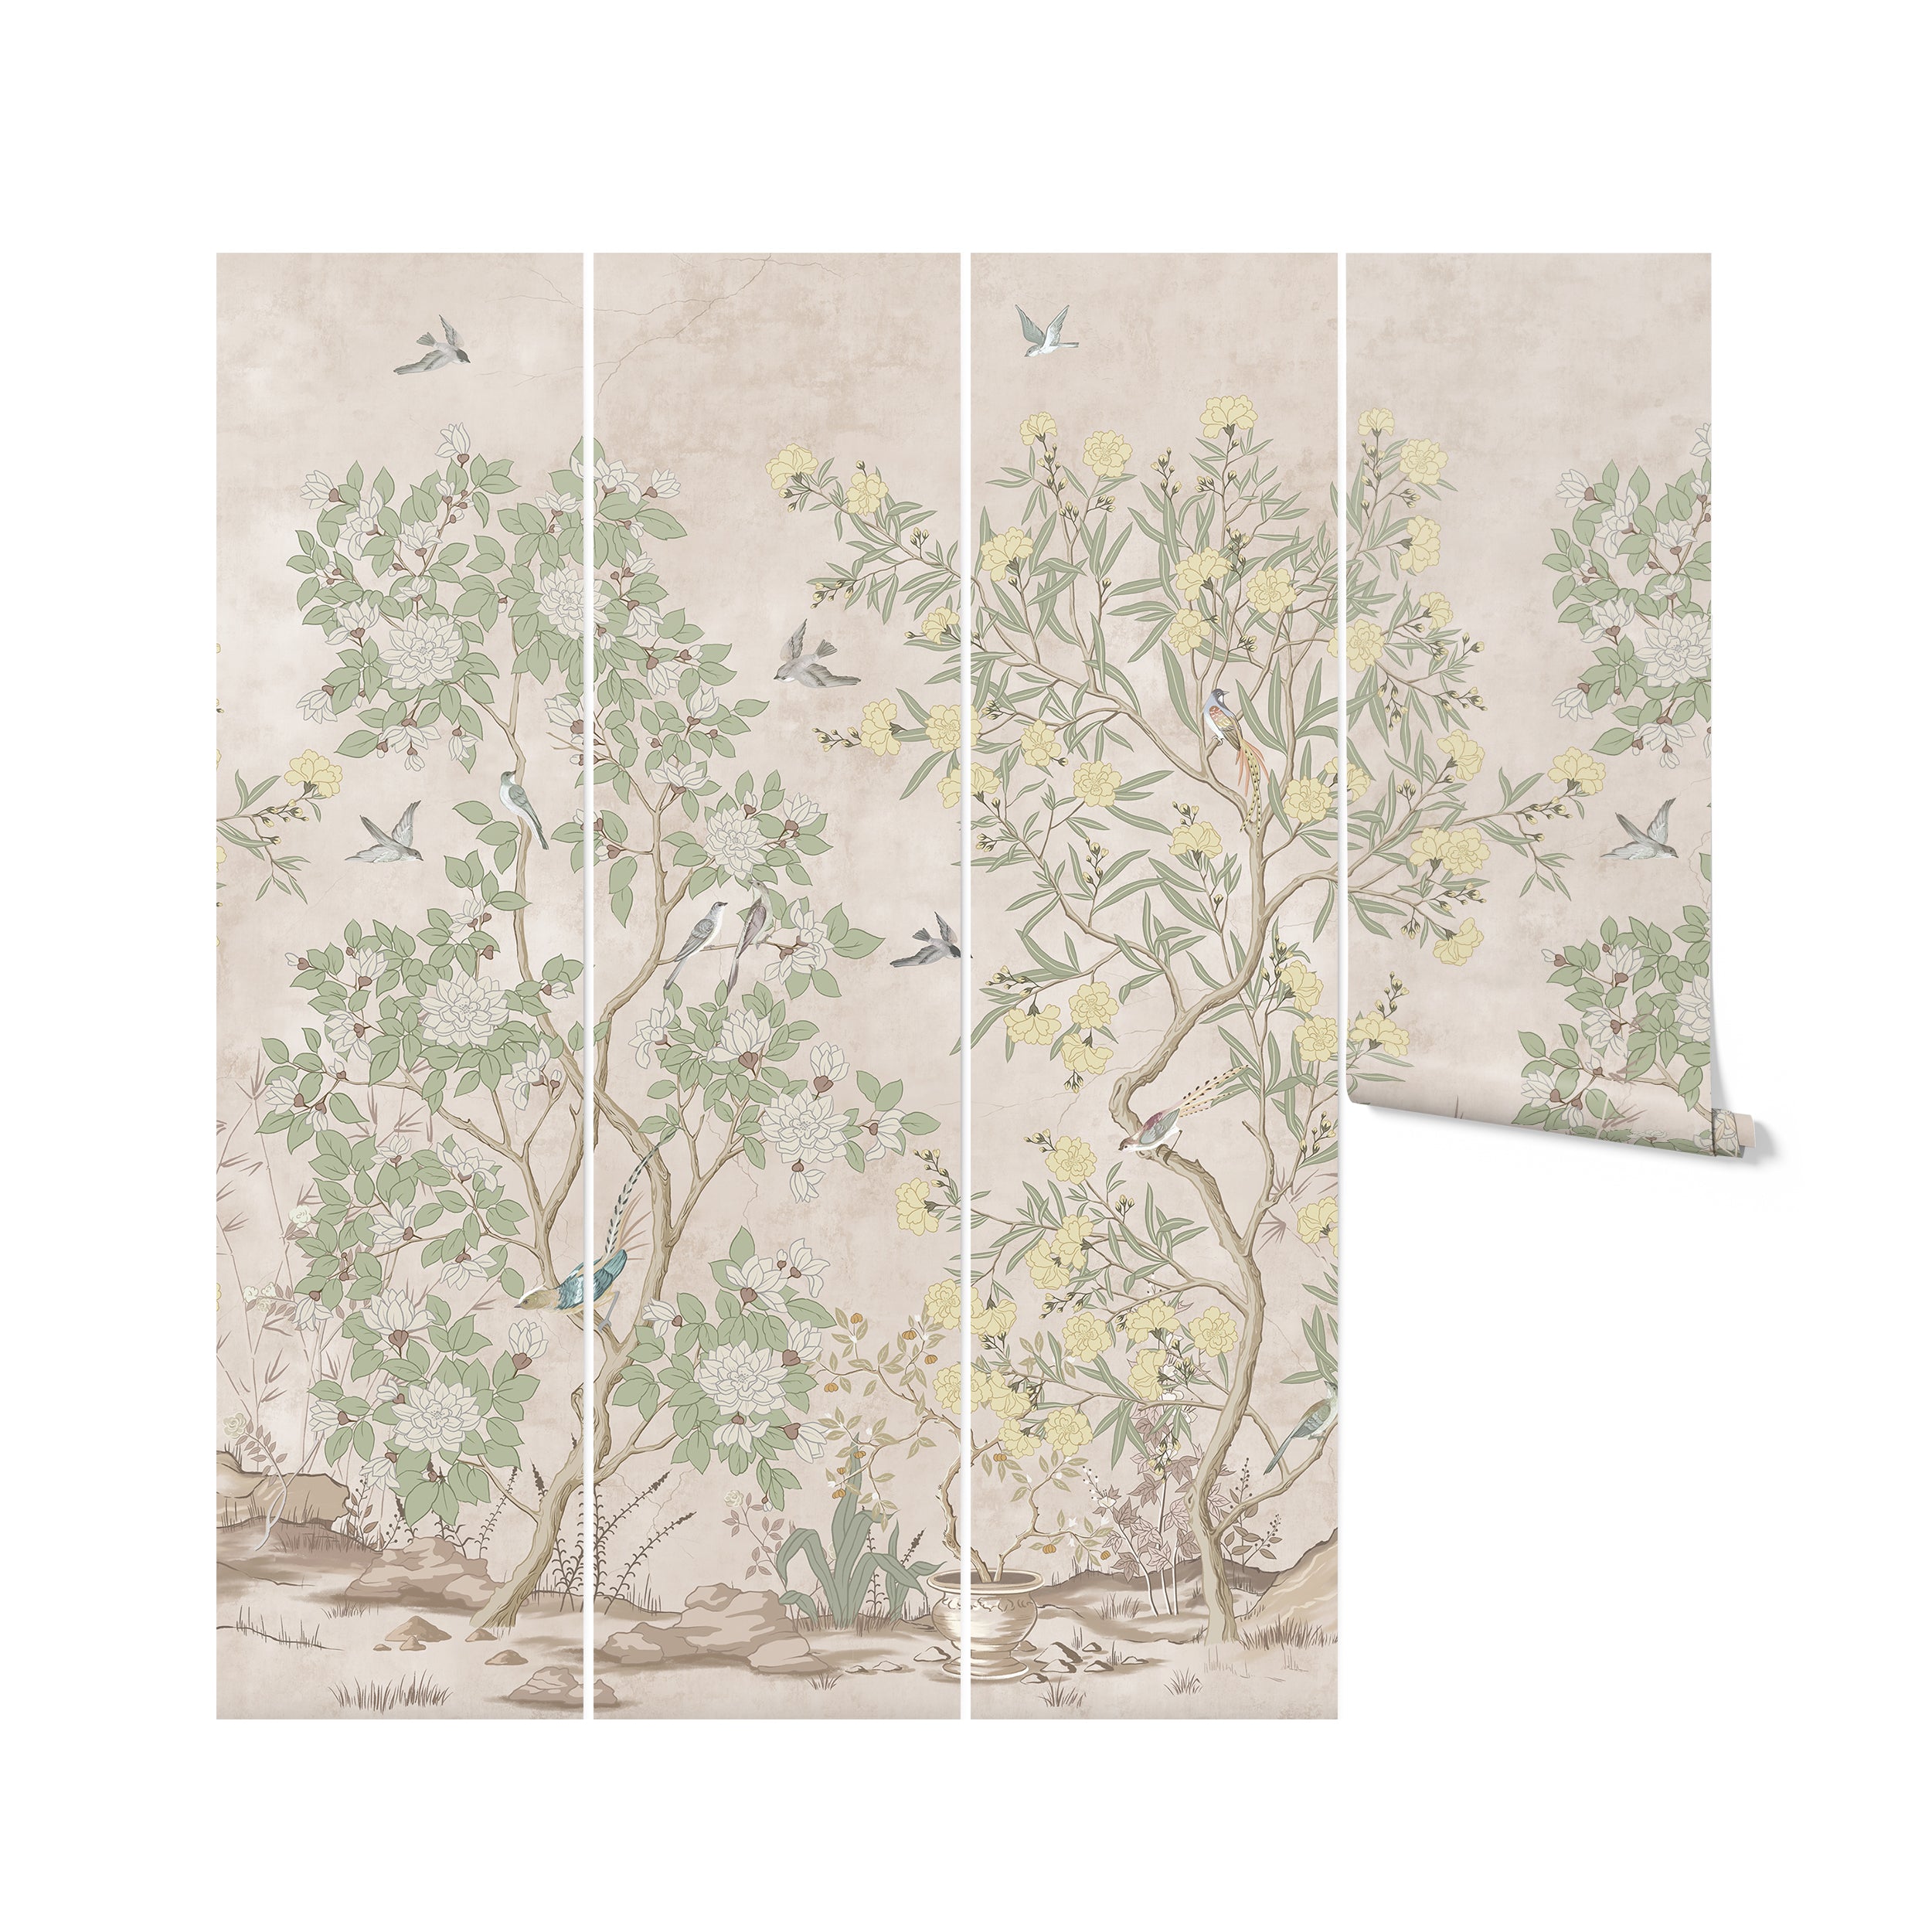 Image of a roll of chinoiserie wallpaper, alongside a depiction of how the pattern repeats across multiple rolls, highlighting the continuous nature scene with trees, birds, and florals designed to create an immersive and decorative wall feature